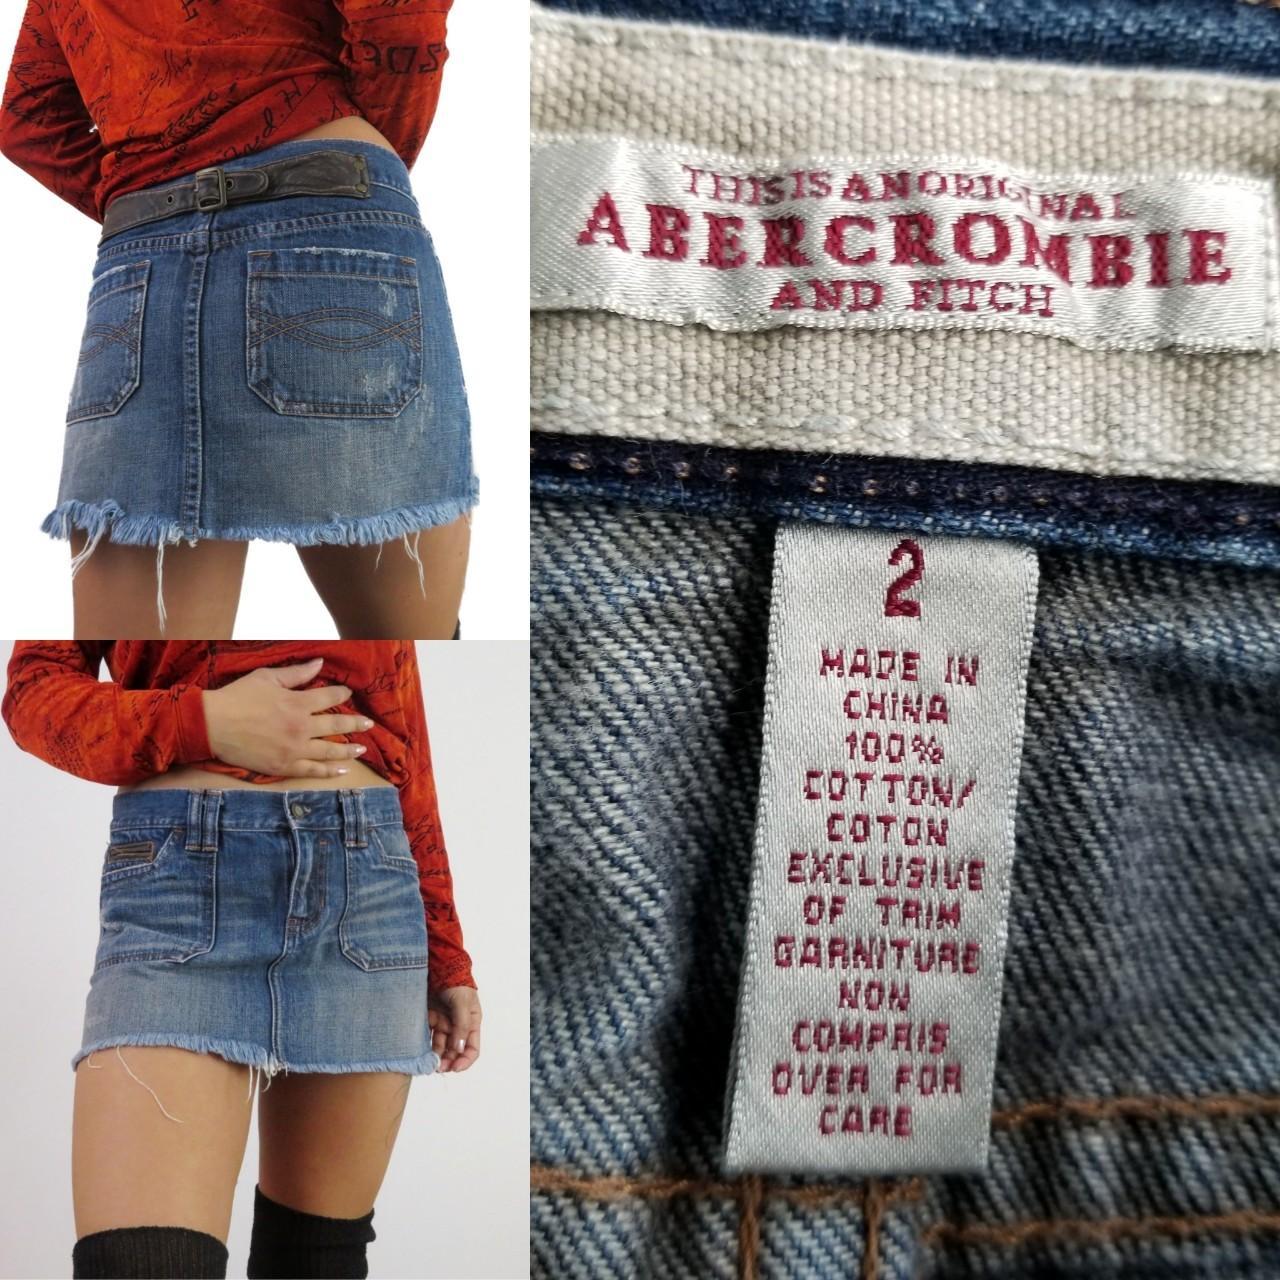 Abercrombie & Fitch Women's Skirt (3)